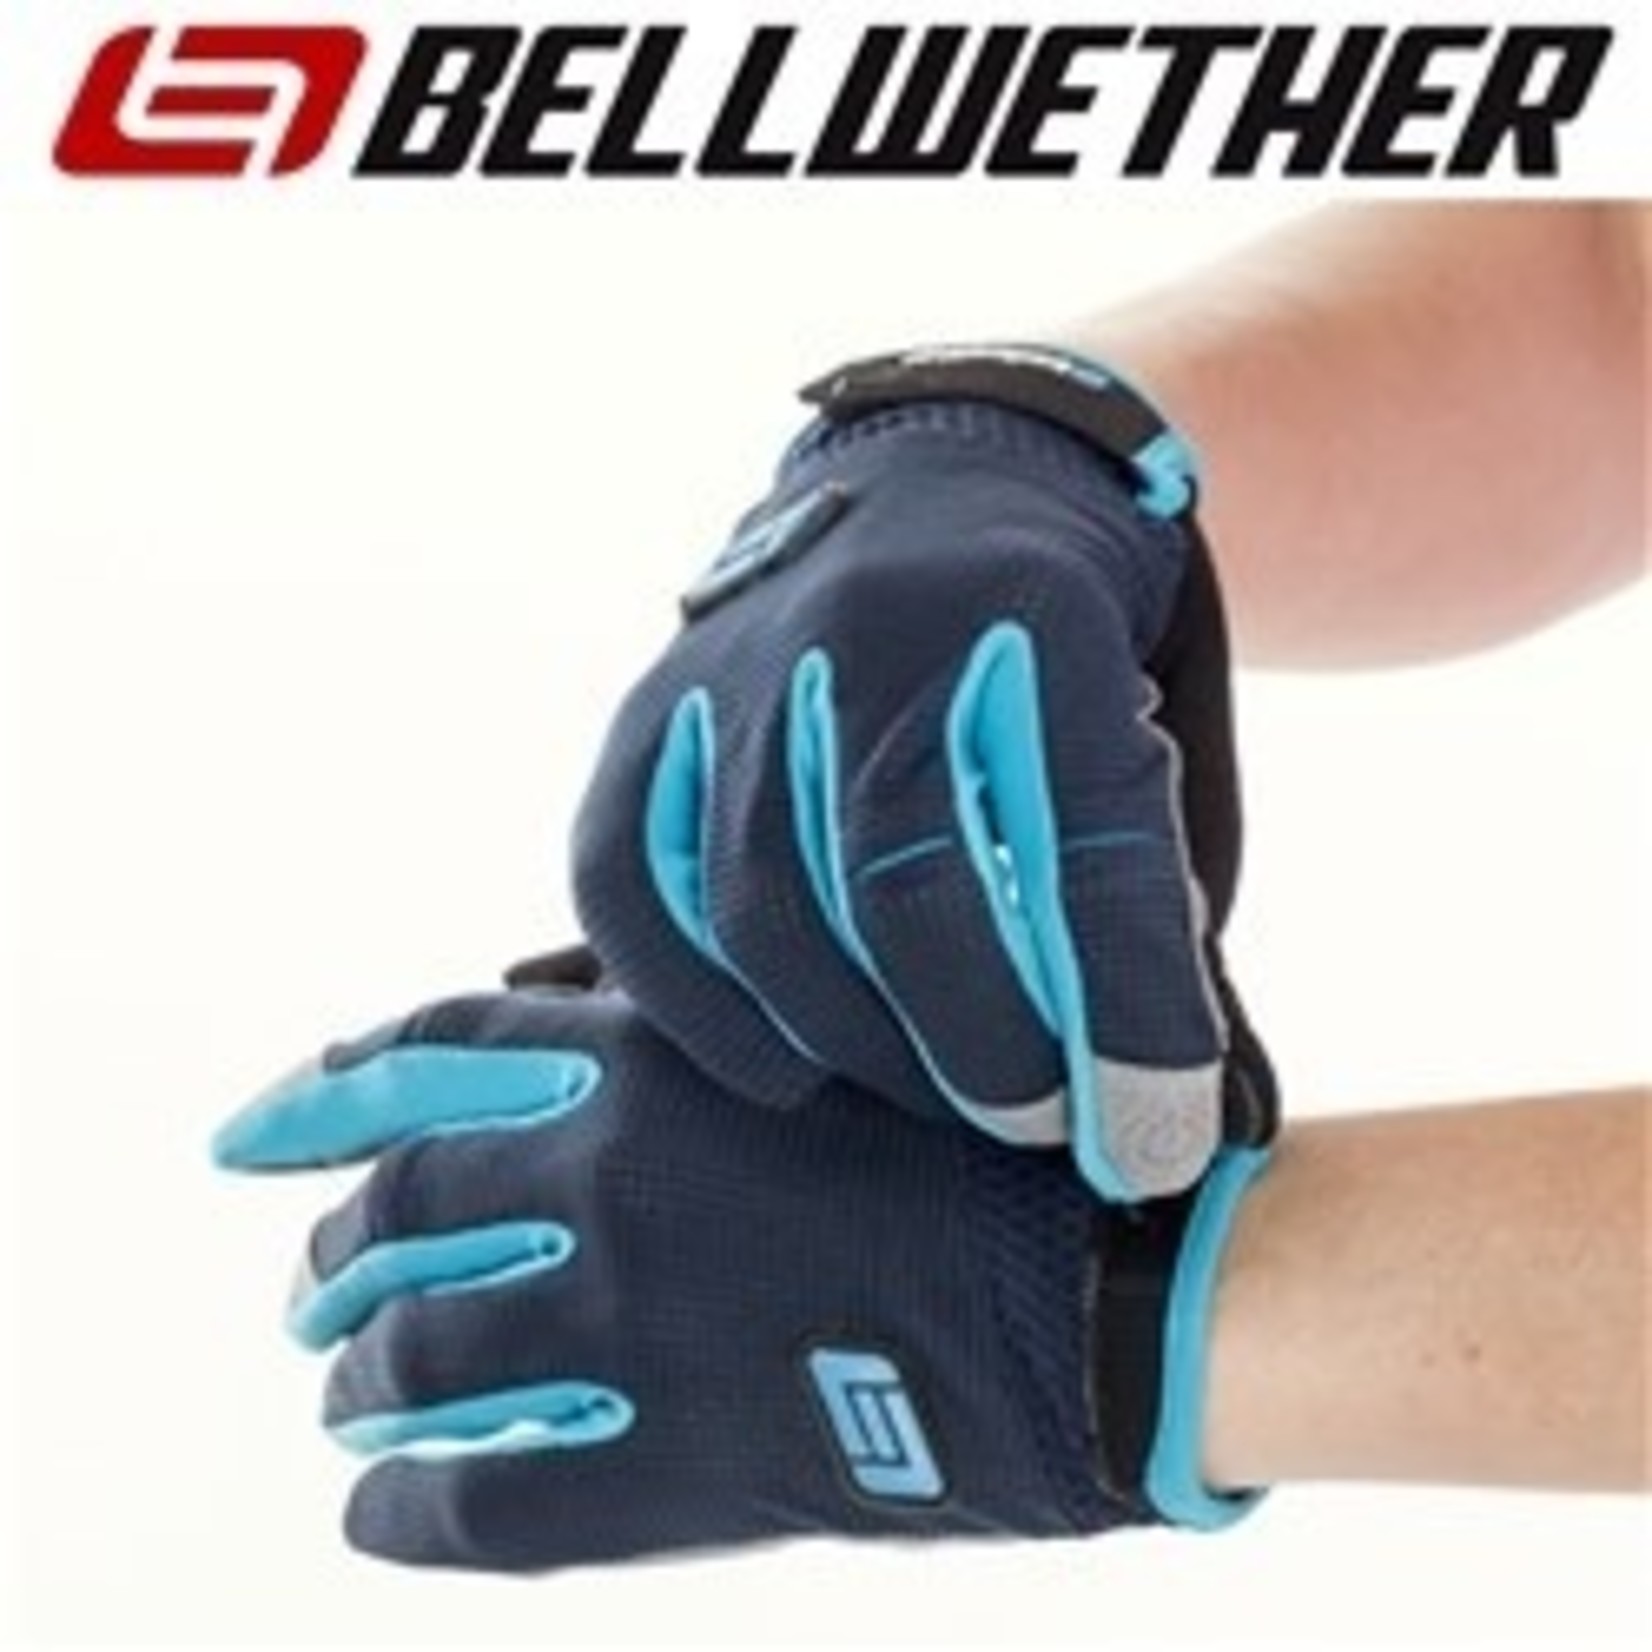 Bellwether Bellwether Cycling Gloves - Women's Direct Dial - Navy